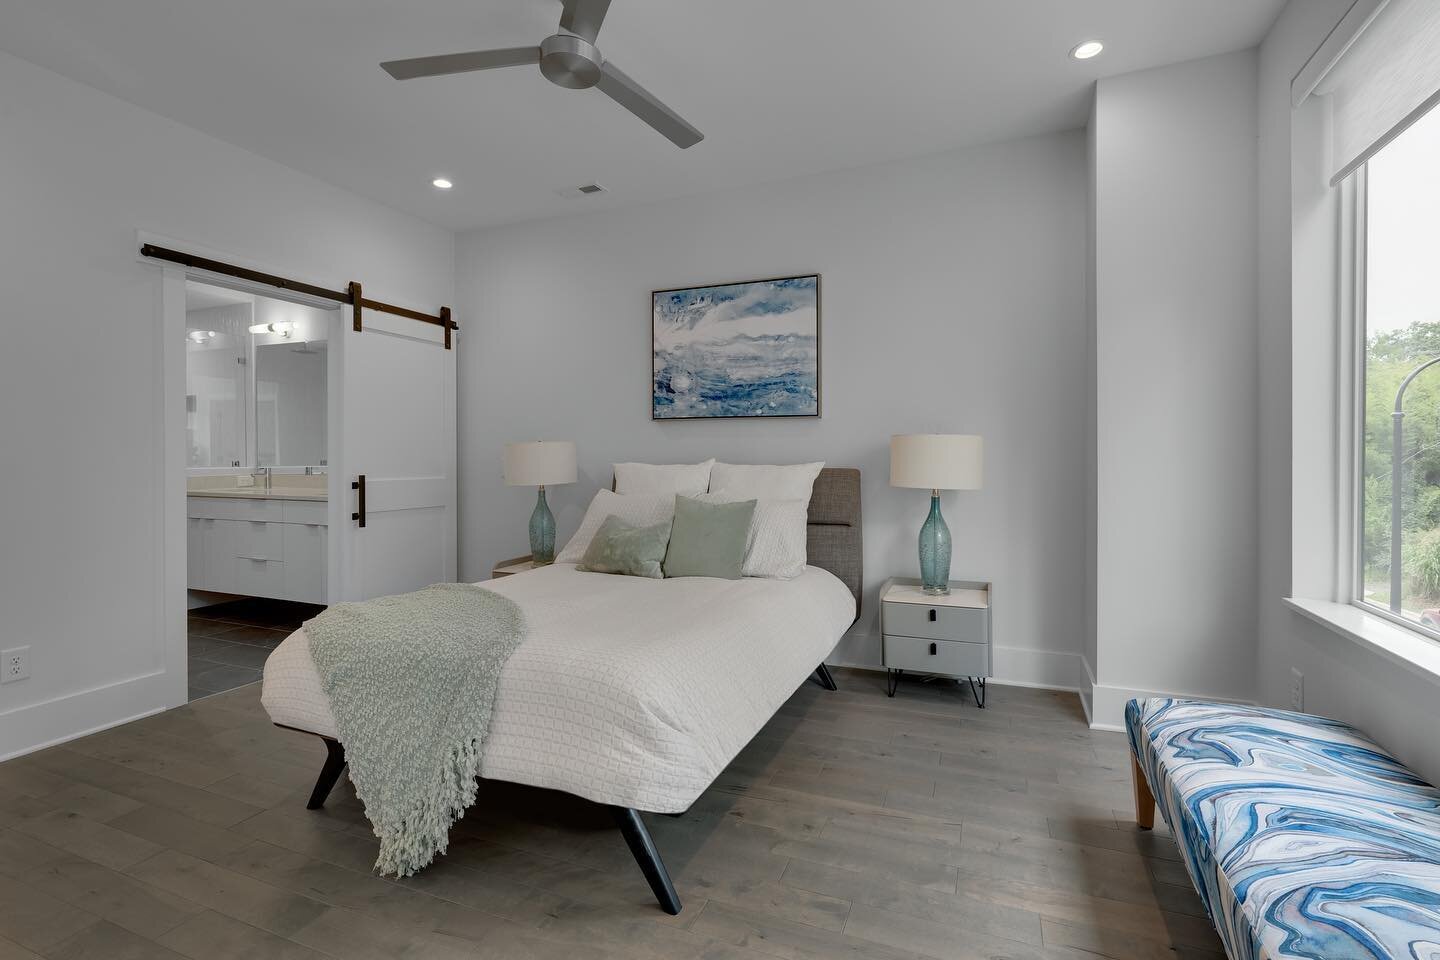 Have a relaxing weekend! Hope you have a chance to sleep in (or get up early for an adventure or to visit open houses if that&rsquo;s more your style!)

@theterracesdurham if you wish this beauty was your bedroom!

#trianglerealestate #trianglereales